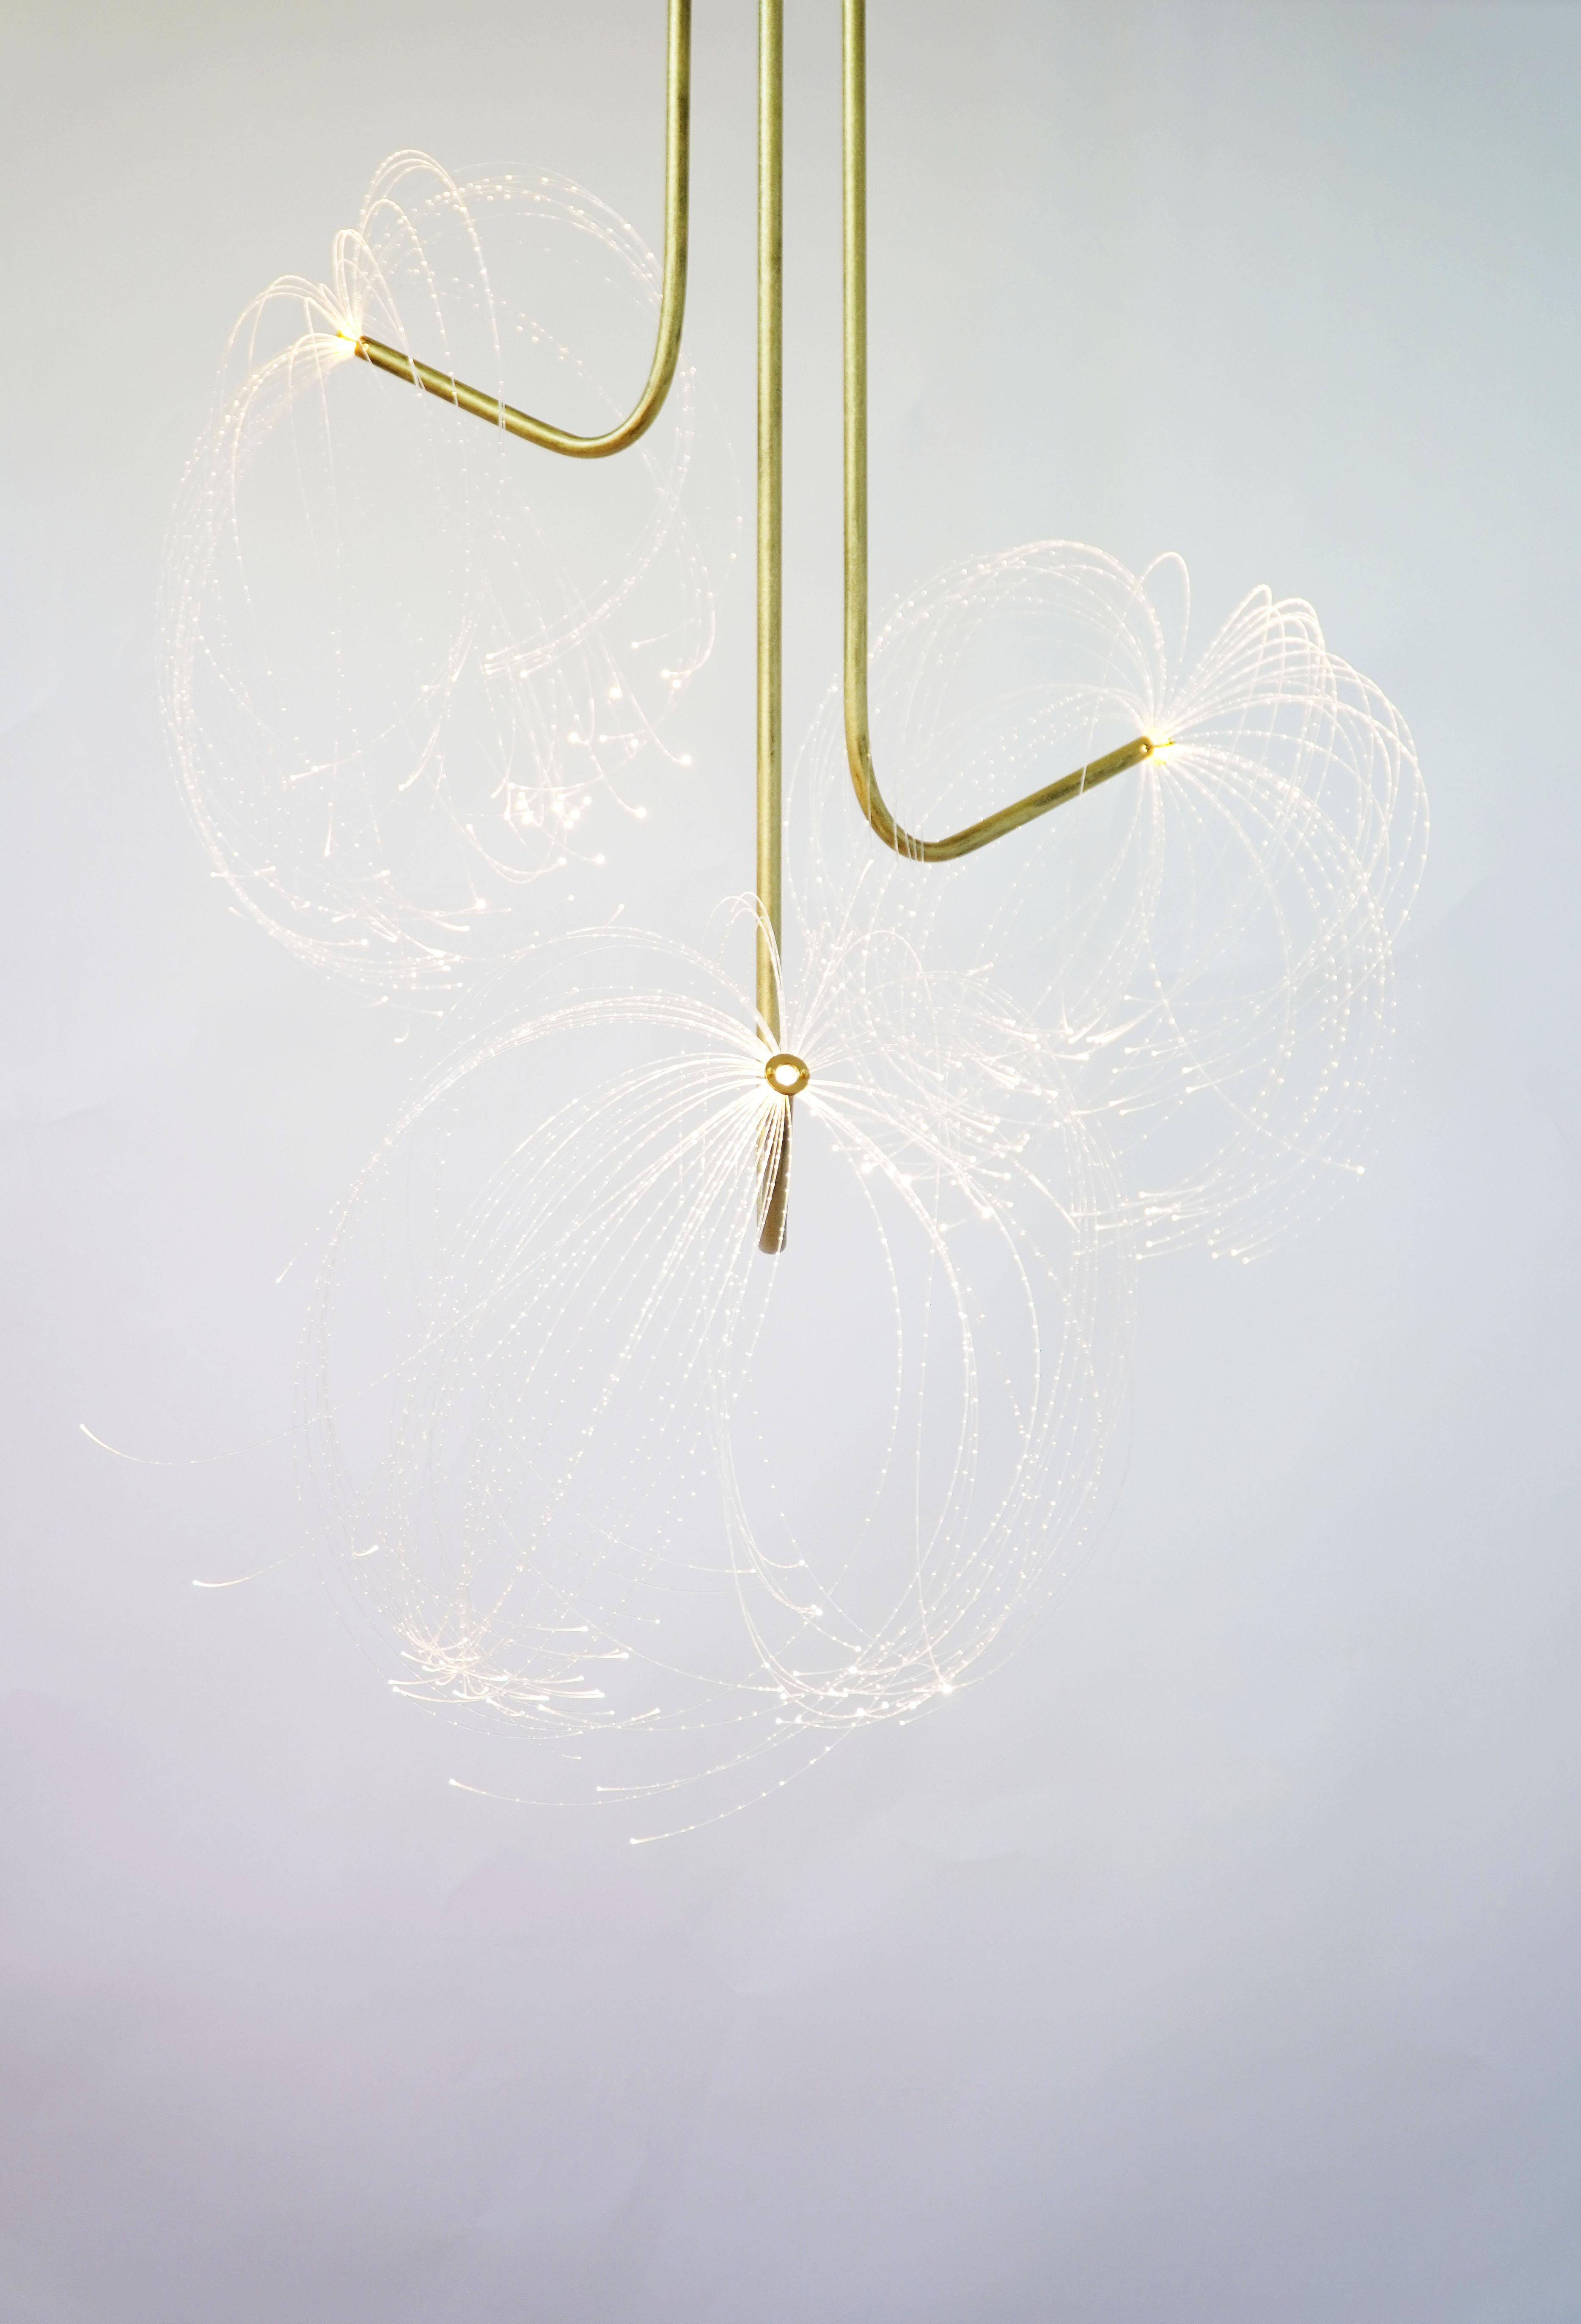 This pendant lamp is a contemporary art object, made entirely by hand in Tuscany Italy, 100% of Italian origin.

The line is essential, the thin brass stems makes irregular curves, are movable and spreads micro dots of clear light, ethereal like